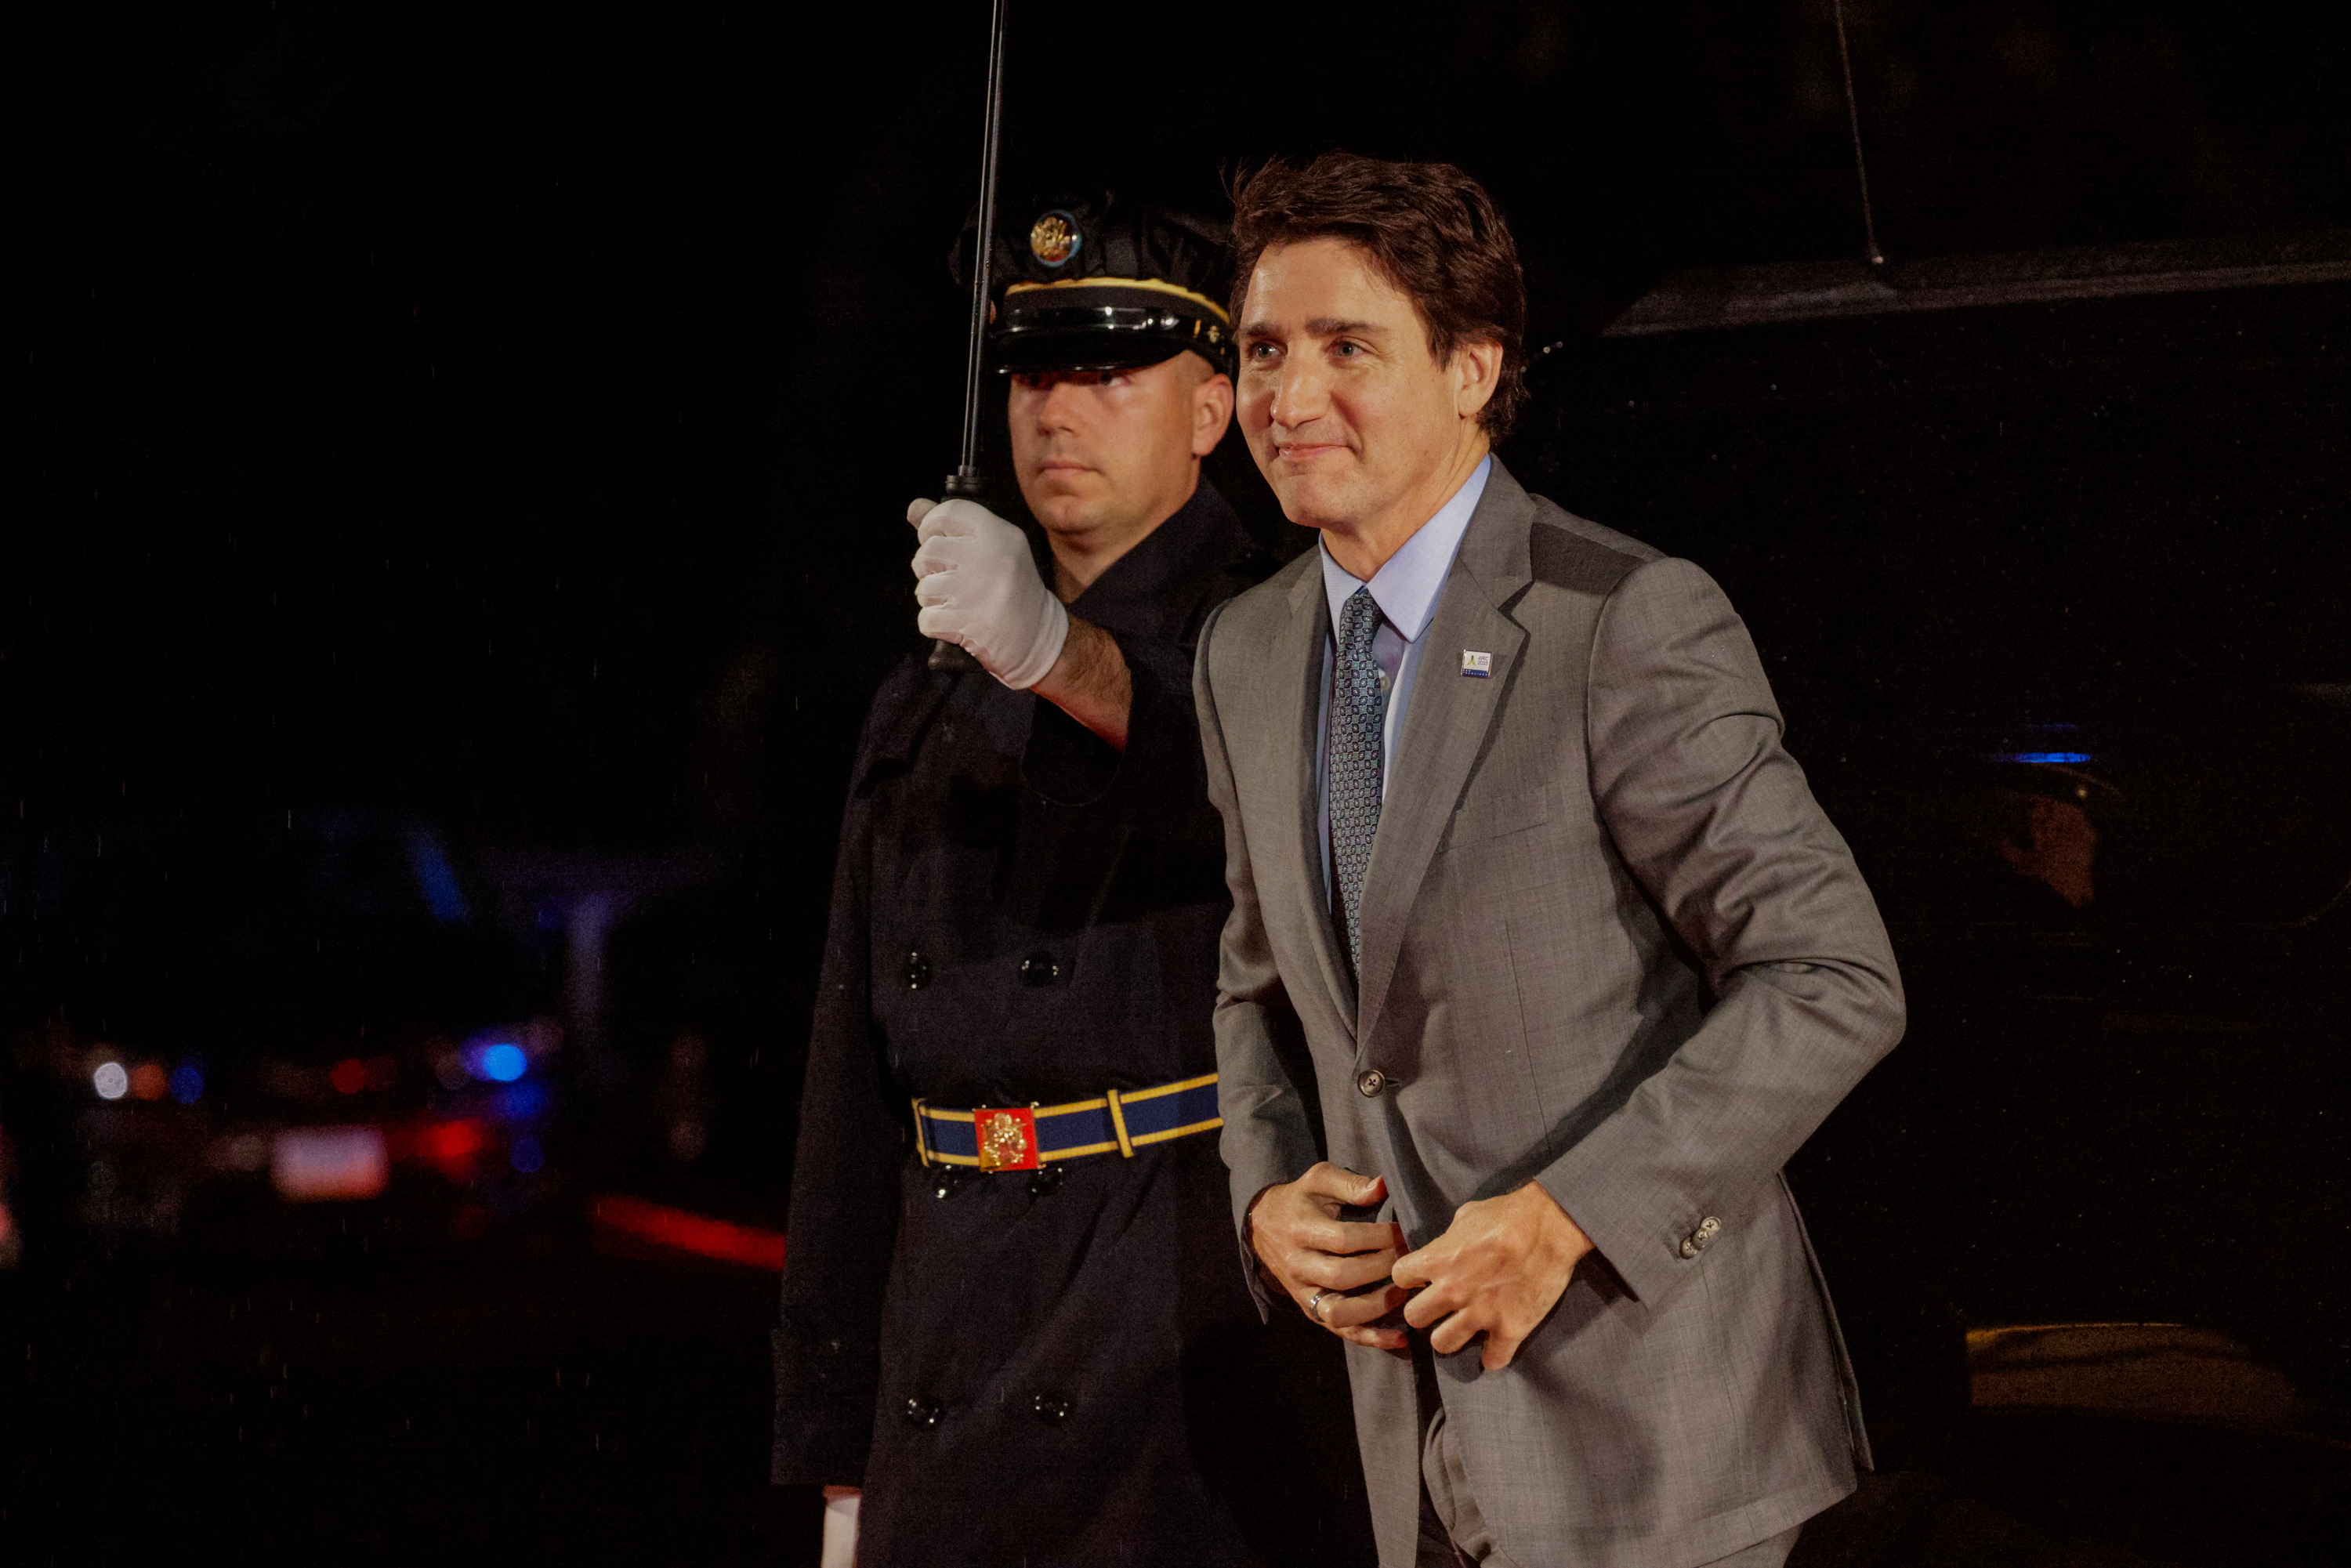 Justin Trudeau arrives at a dinner at the Legion of Honor in San Francisco.